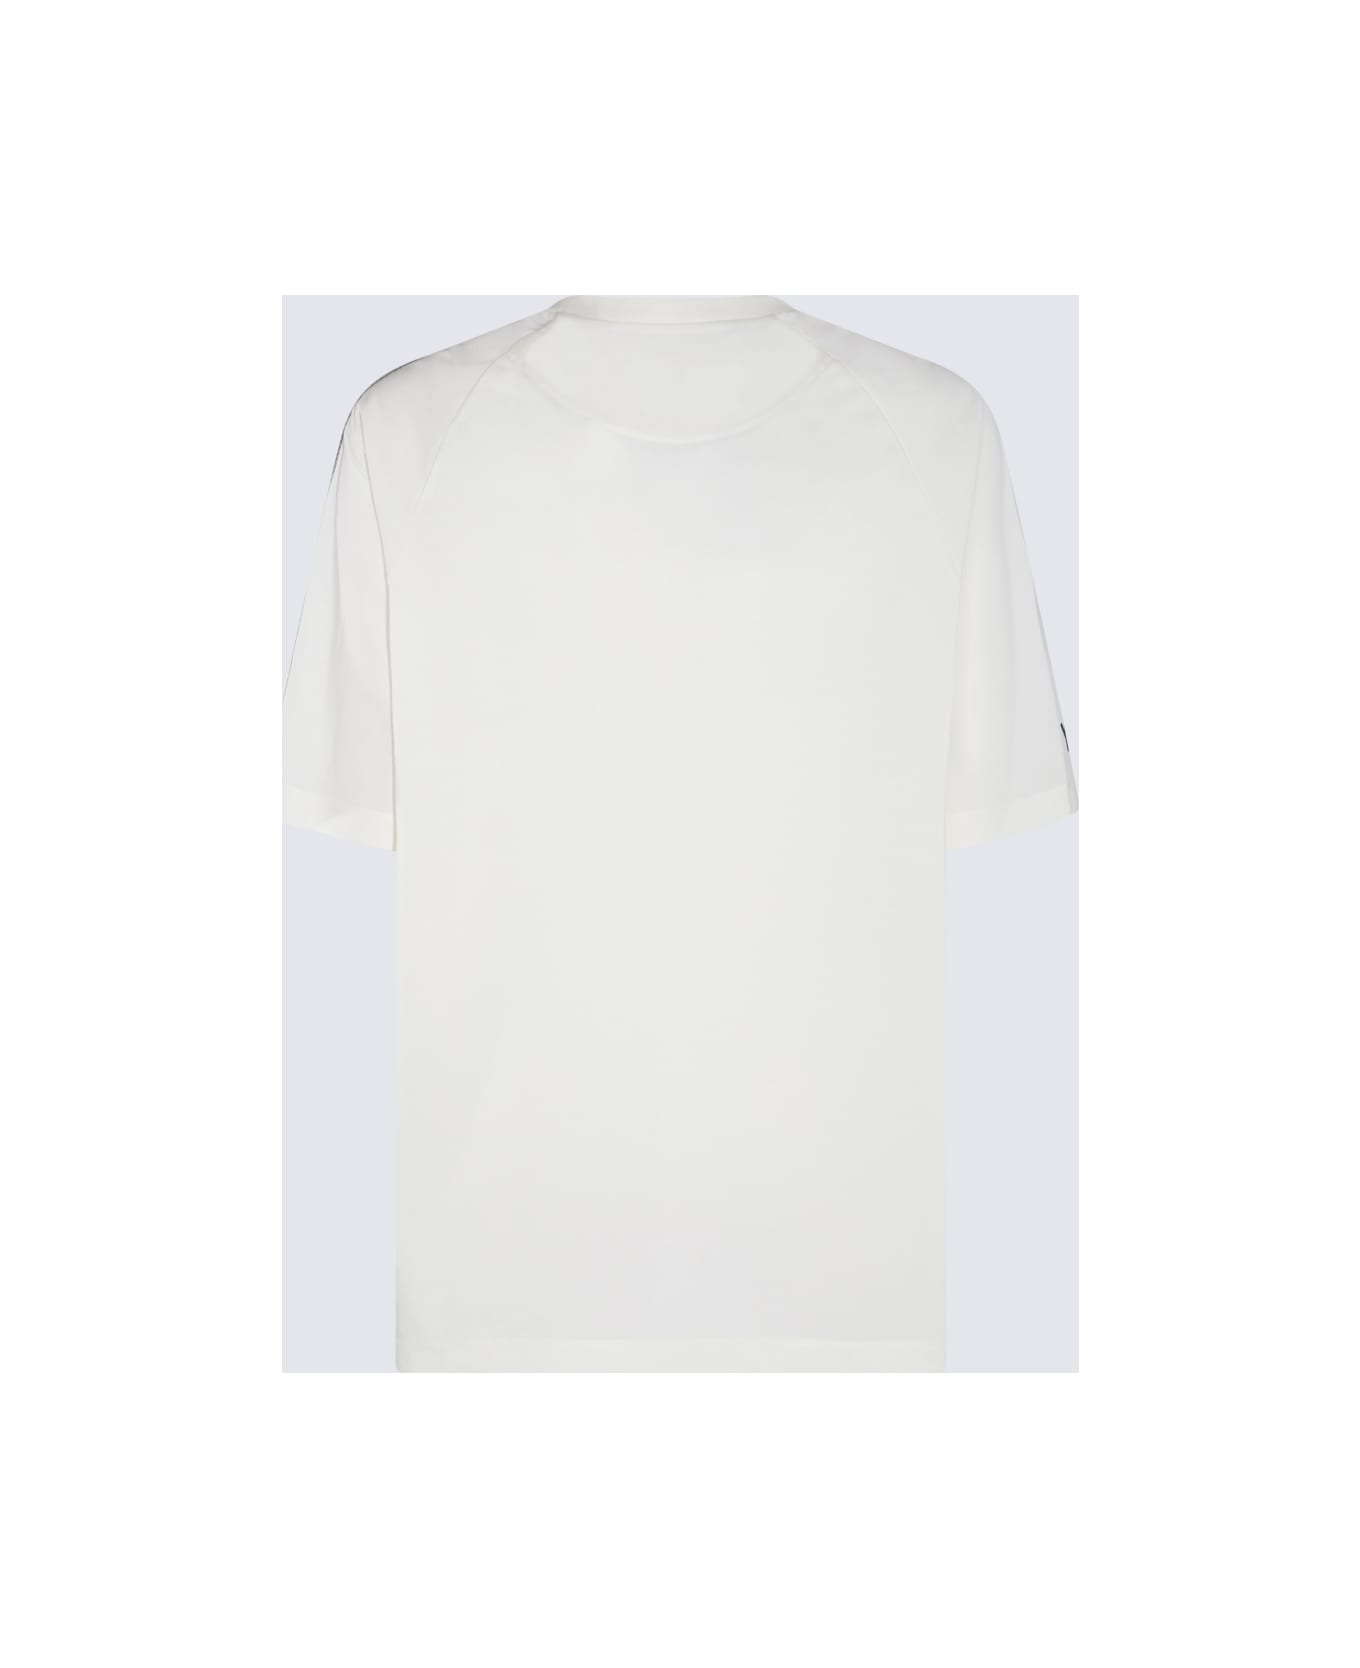 Y-3 White And Grey Cotton T-shirt - Beige Tシャツ